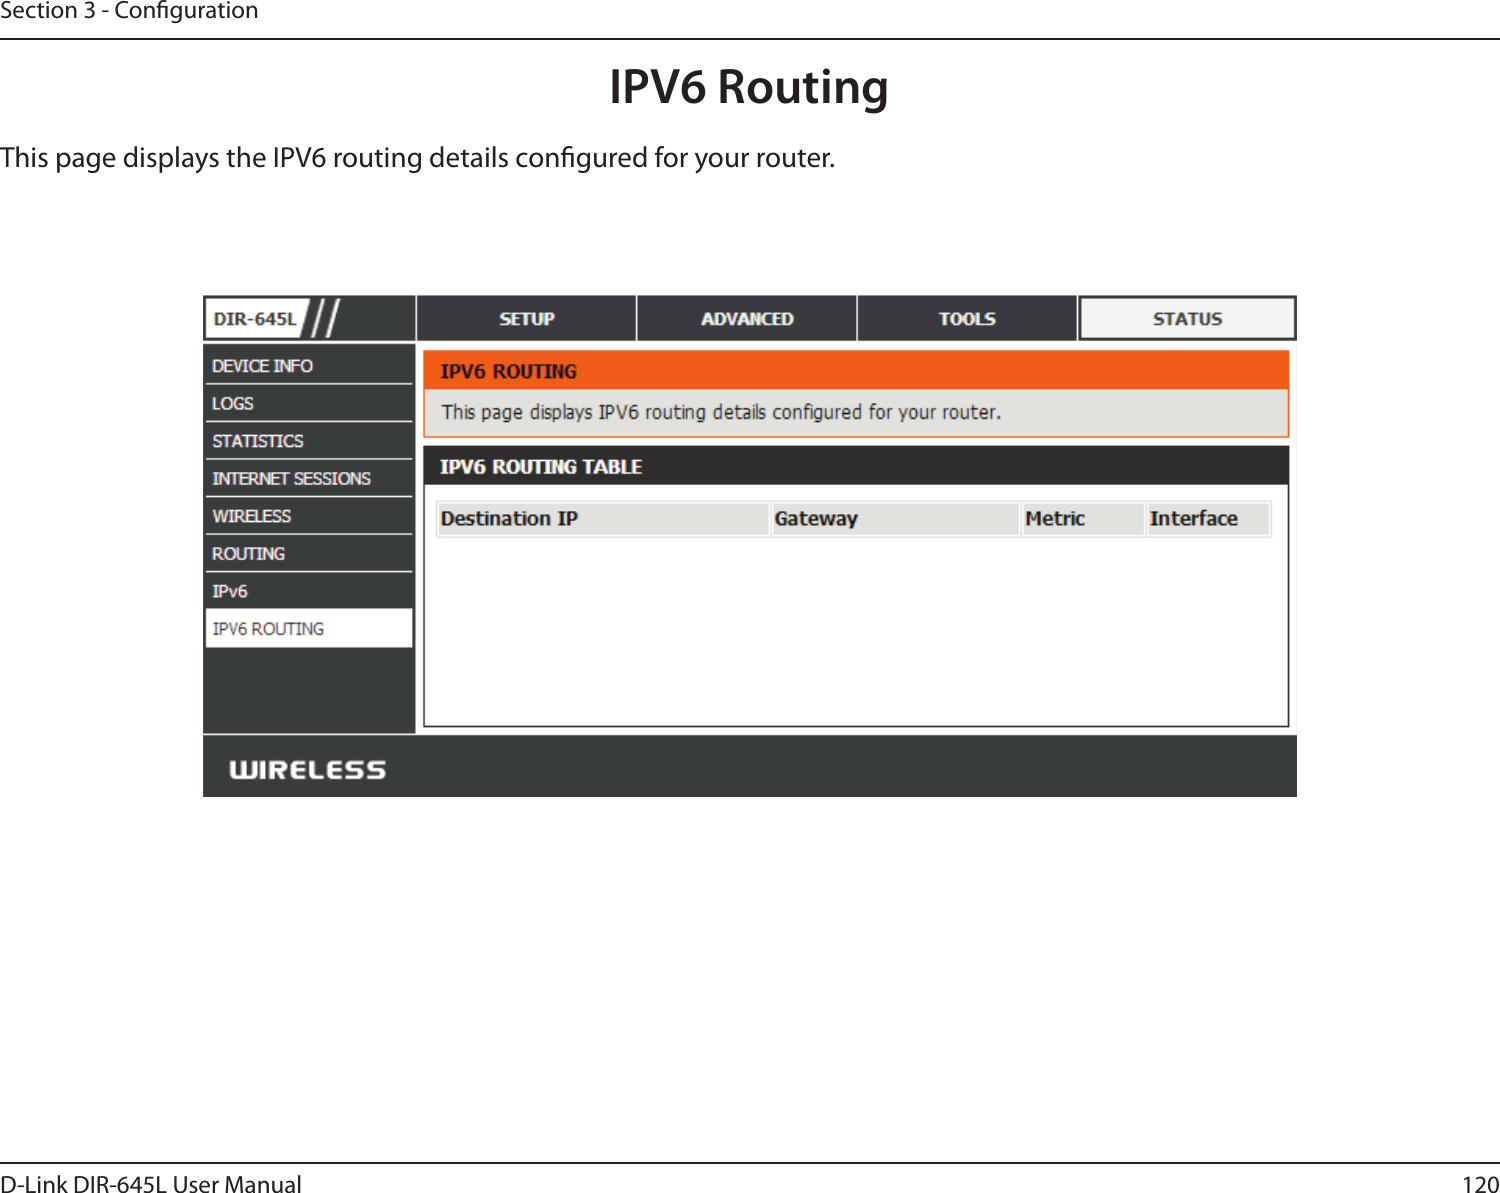 120D-Link DIR-645L User ManualSection 3 - CongurationIPV6 RoutingThis page displays the IPV6 routing details congured for your router. 